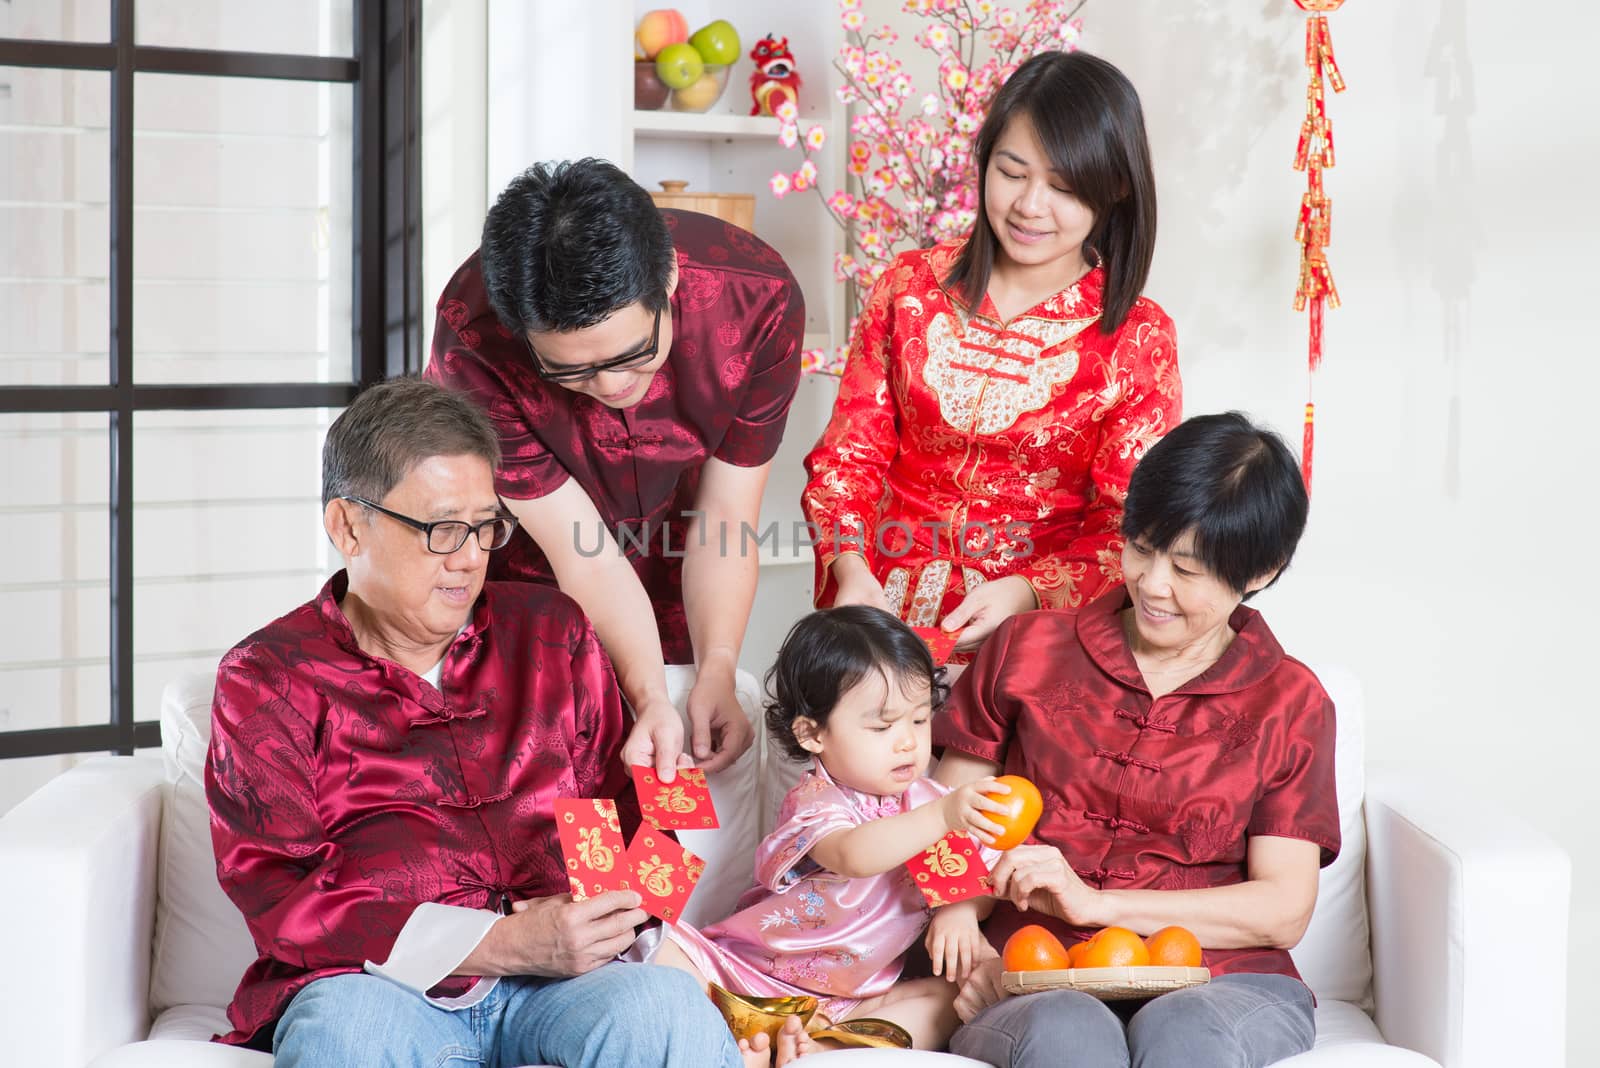 Chinese new year celebration. Happy Asian multi generations family in red cheongsam showing red packets while reunion at home.